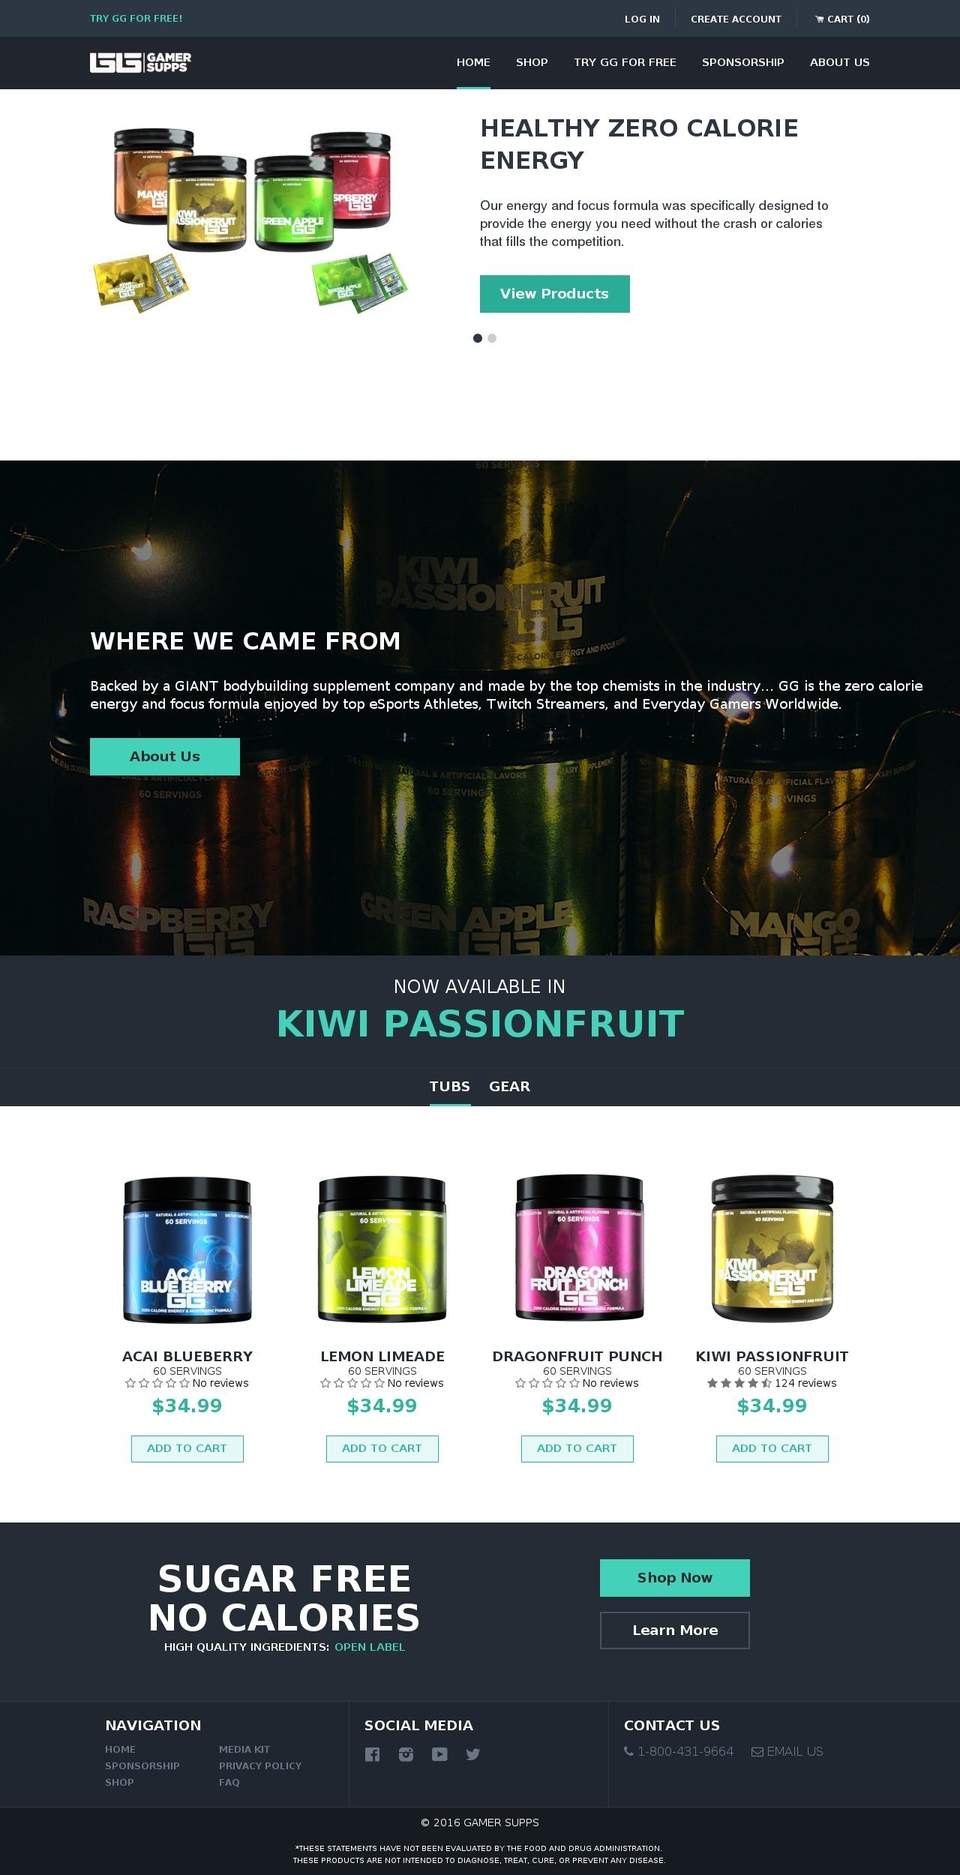 Impact Shopify theme site example gamersupps.gg